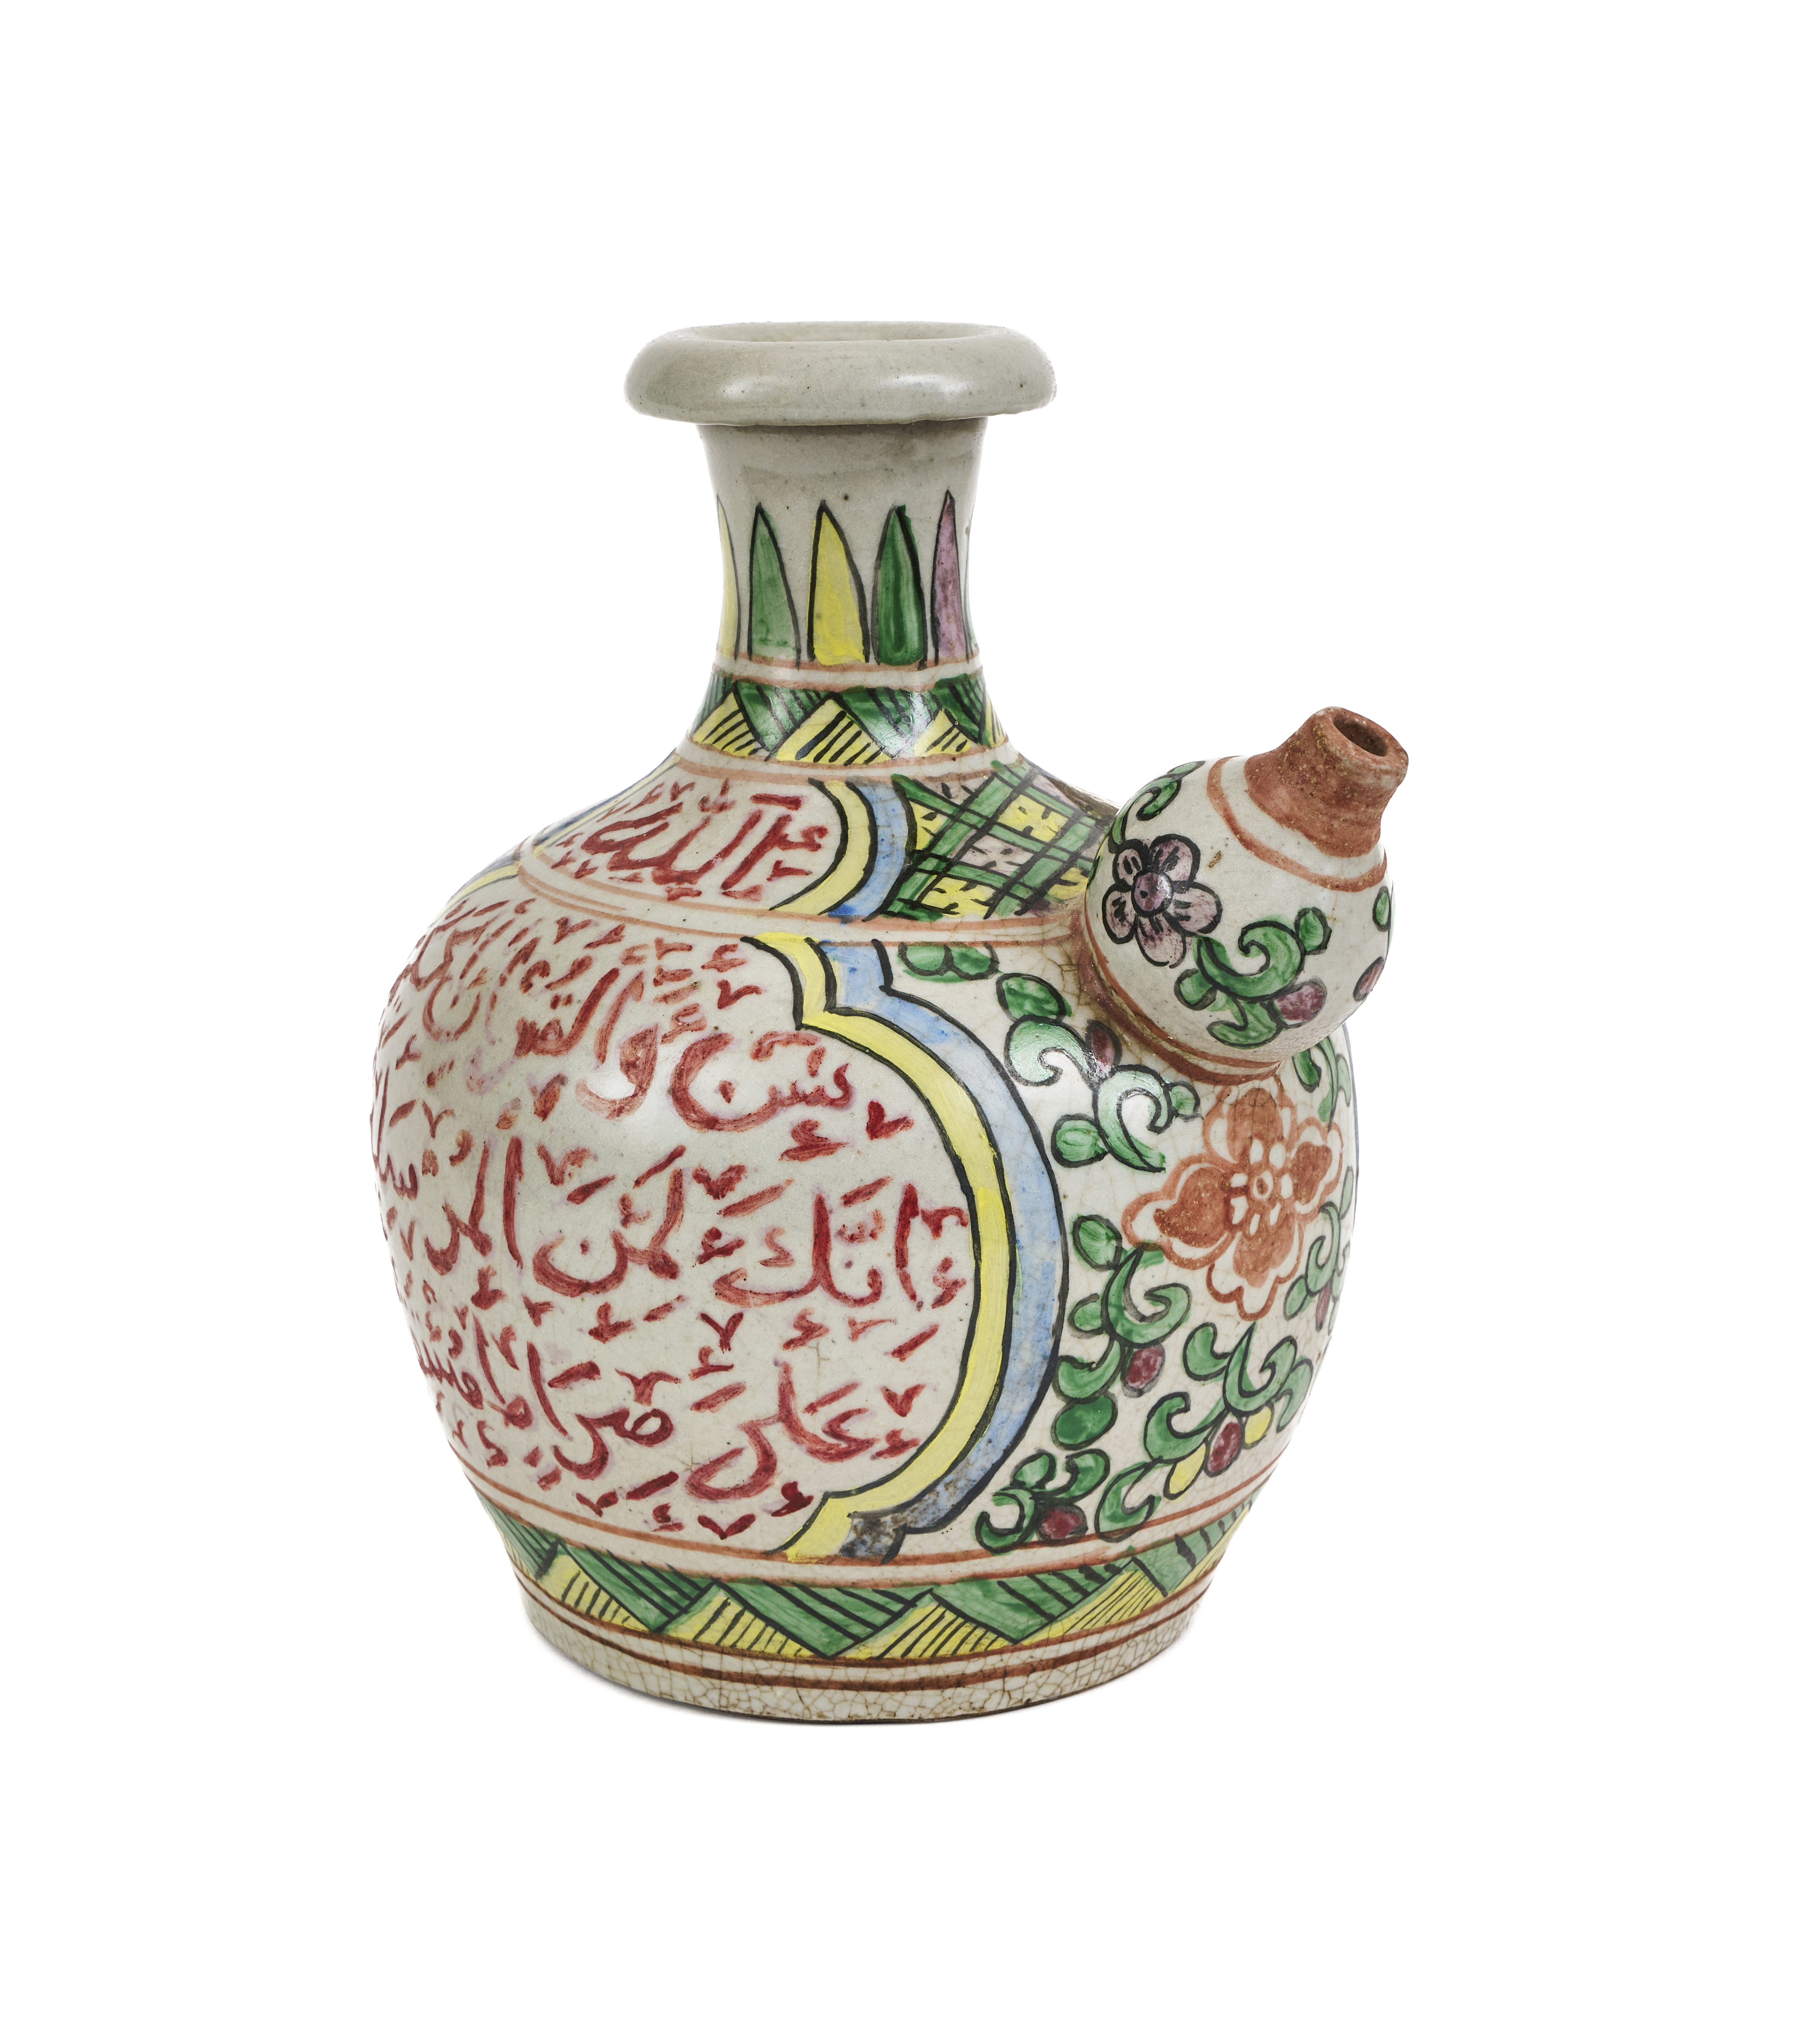 A LARGE CHINESE POLYCHROME PAINTED KENDI WITH ISLAMIC INSCRIPTION, 19TH CENTURY - Image 2 of 4